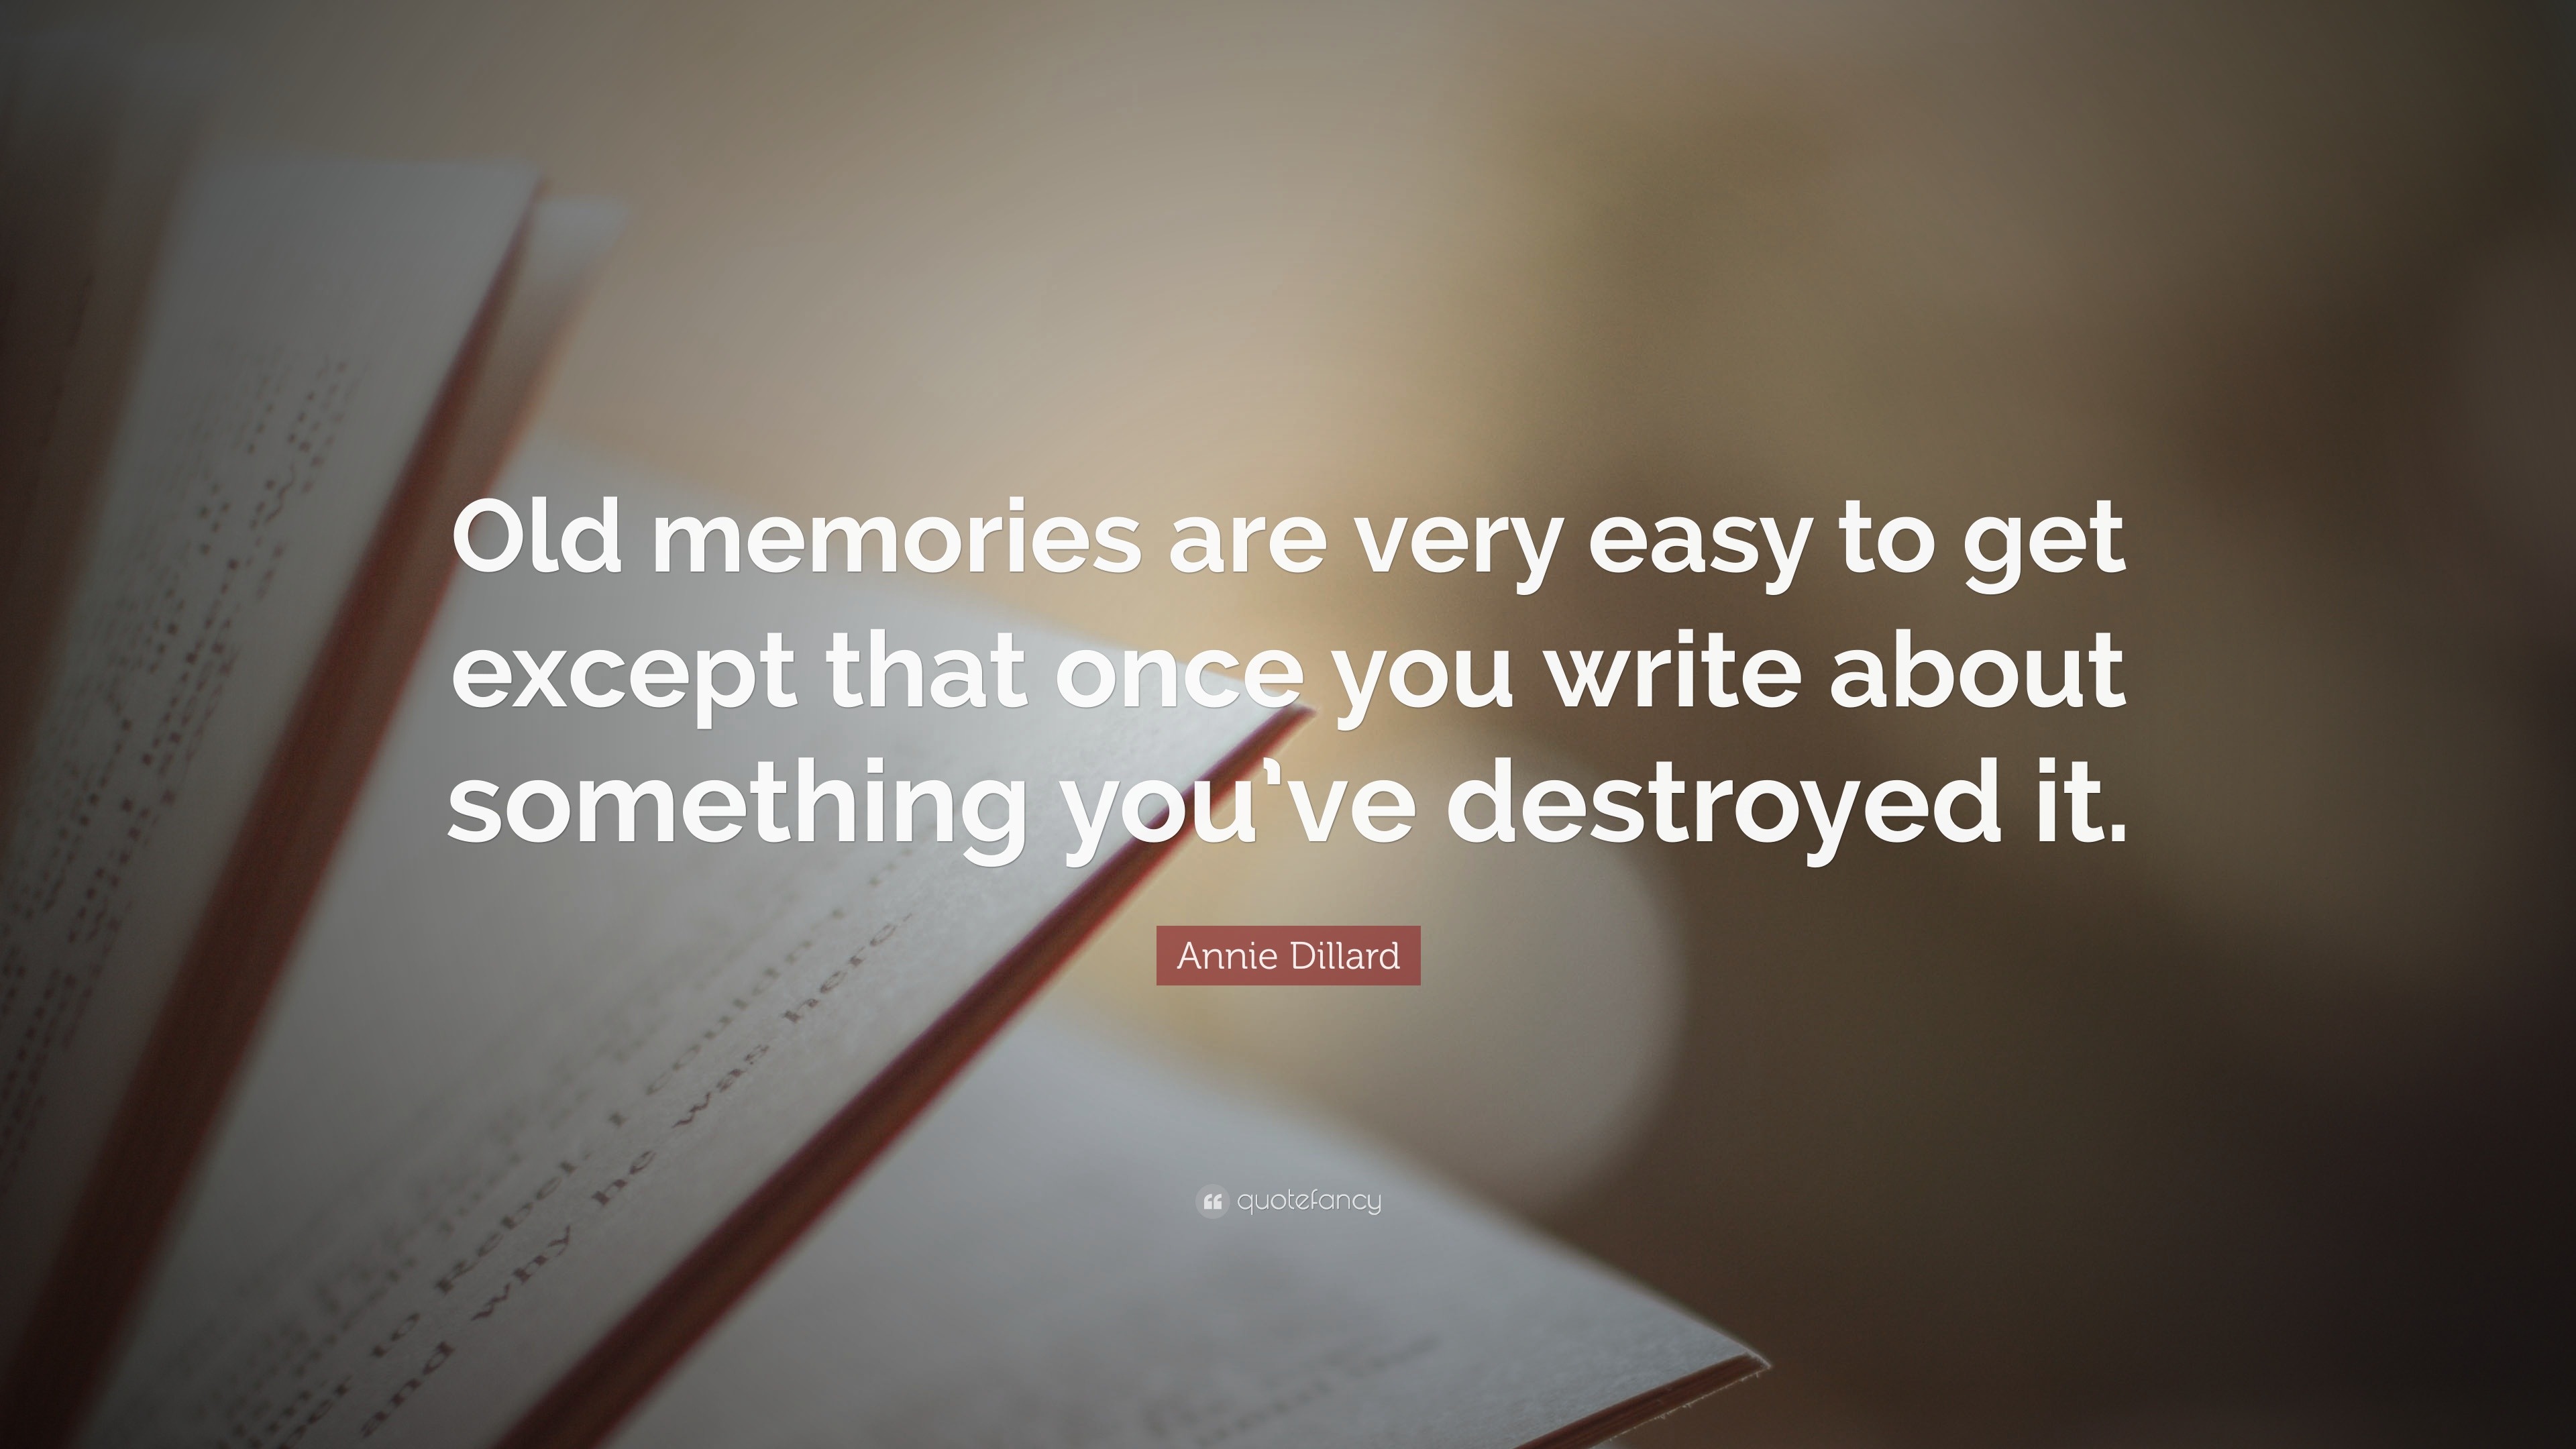 Annie Dillard Quote: “Old memories are very easy to get except